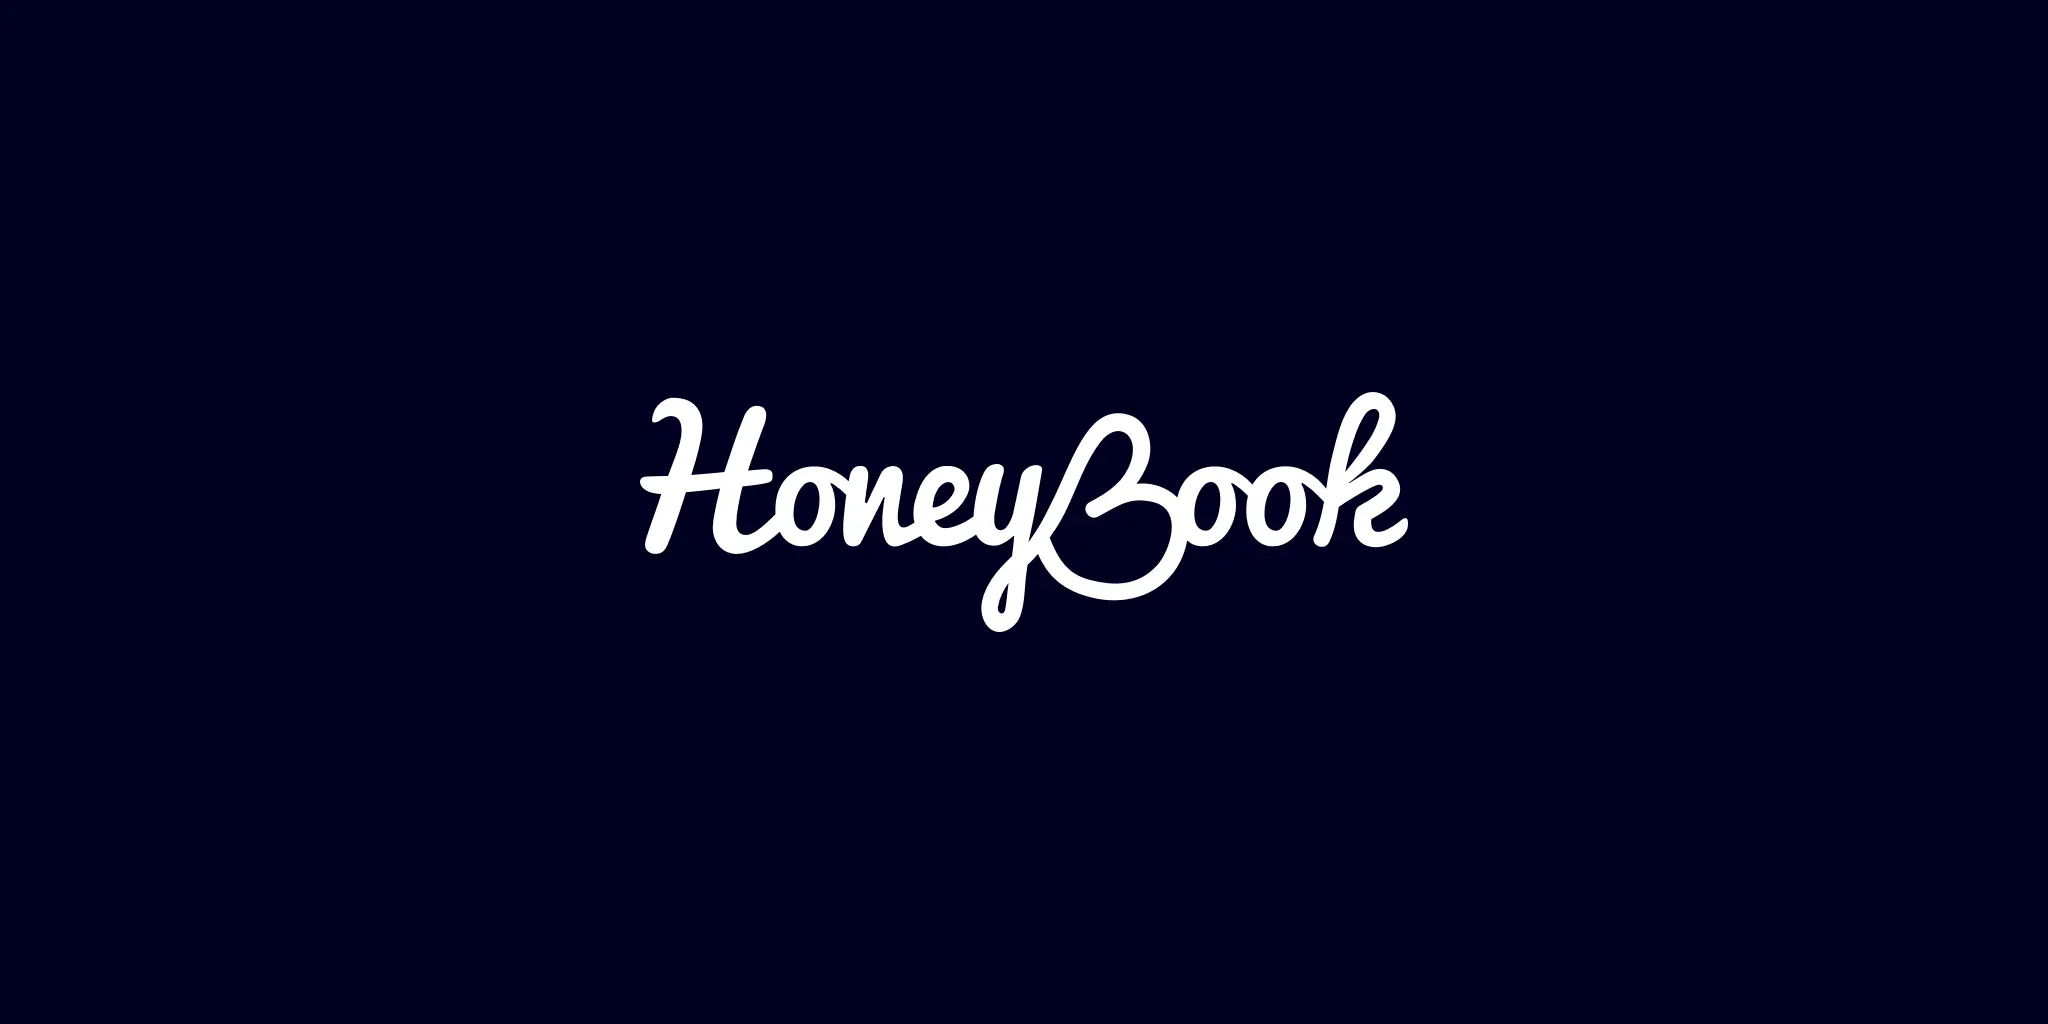 HoneyBook – A Great Business Management Tool